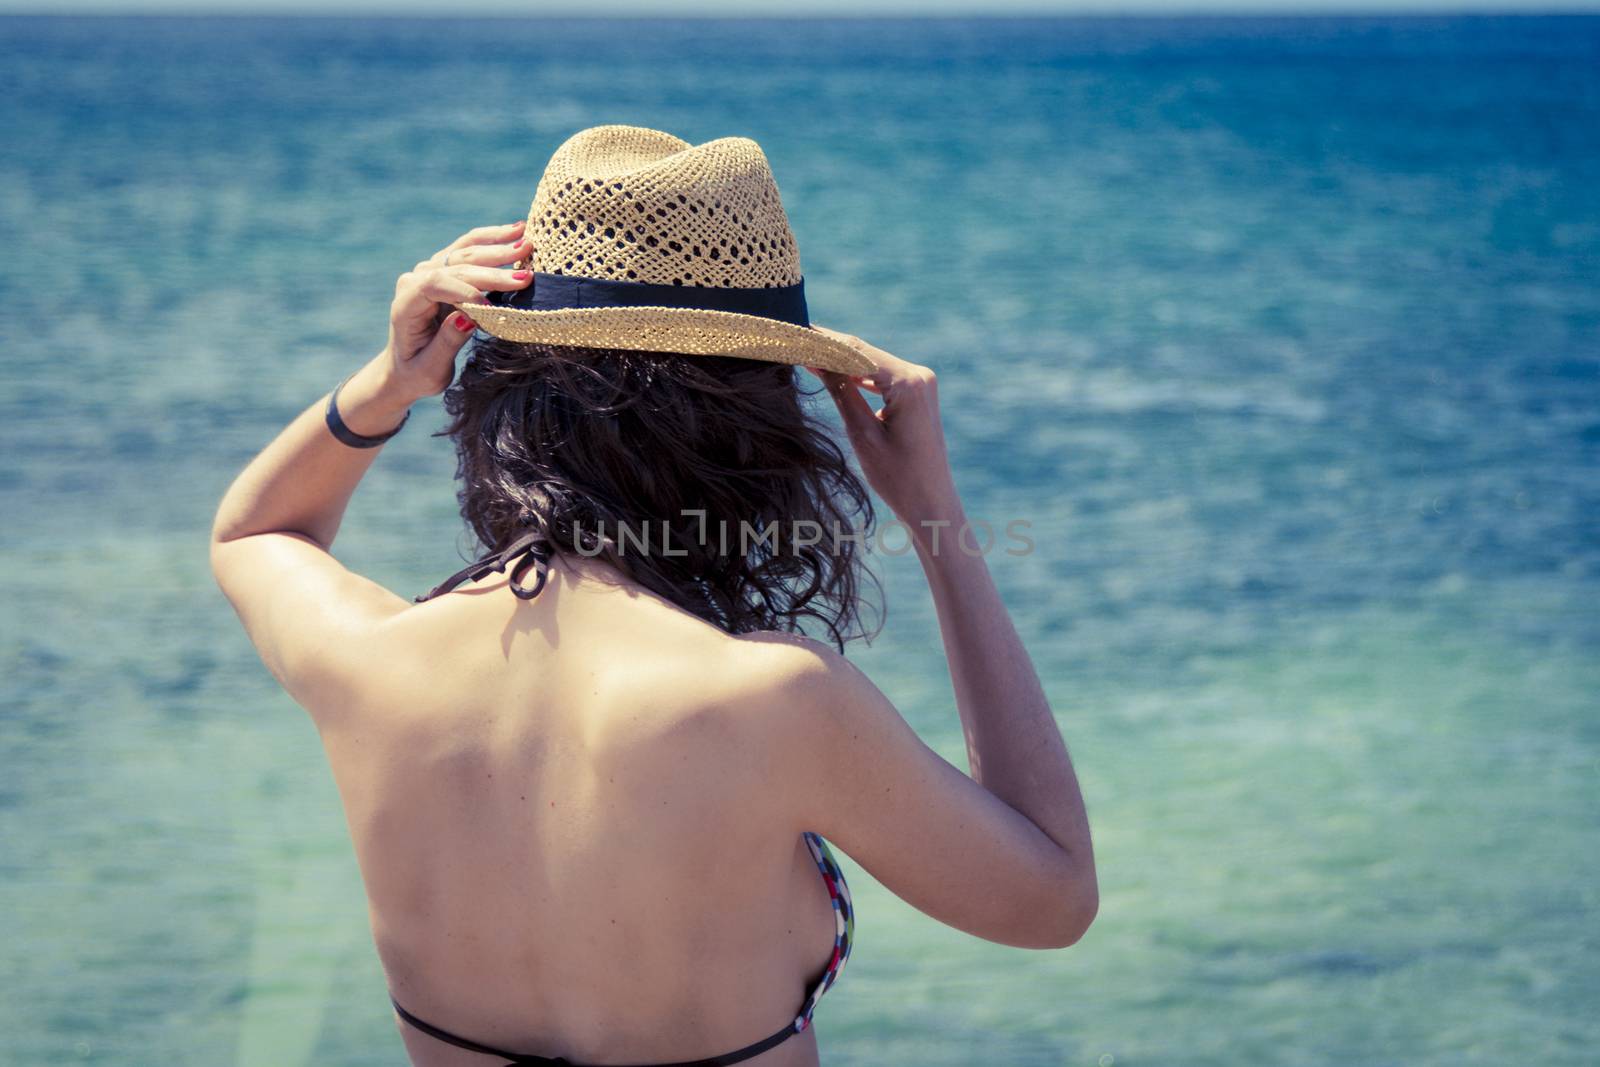 Beautiful woman in sunhat and bikini looking at the beach on a hot summer day. Photo from Fuerteventura Island, Spain by tanaonte